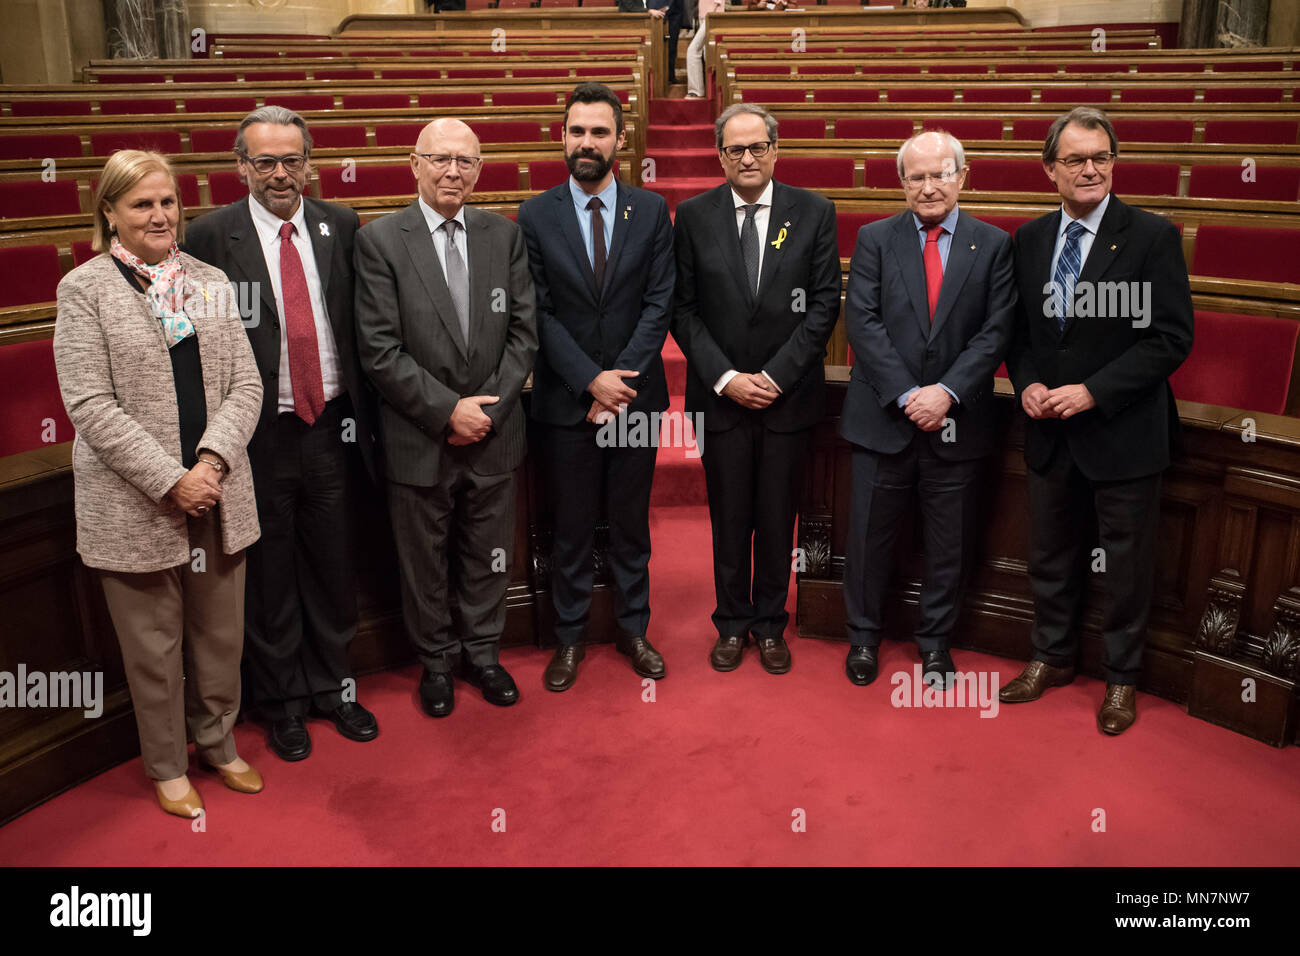 Barcelona, Spain. 14th May, 2018. New Catalan president QUIM TORRA (3rd R) poses with former Catalan presidents in the Catalonian parliament. Pro- independence politician Quim Torra has been elected new president by the parliament of Catalonia.  Torra  said  he will work to free the imprisoned Catalan leaders and make come home the exiles while go ahead with the Catalan Republic. Credit:  Jordi Boixareu/Alamy Live News Stock Photo